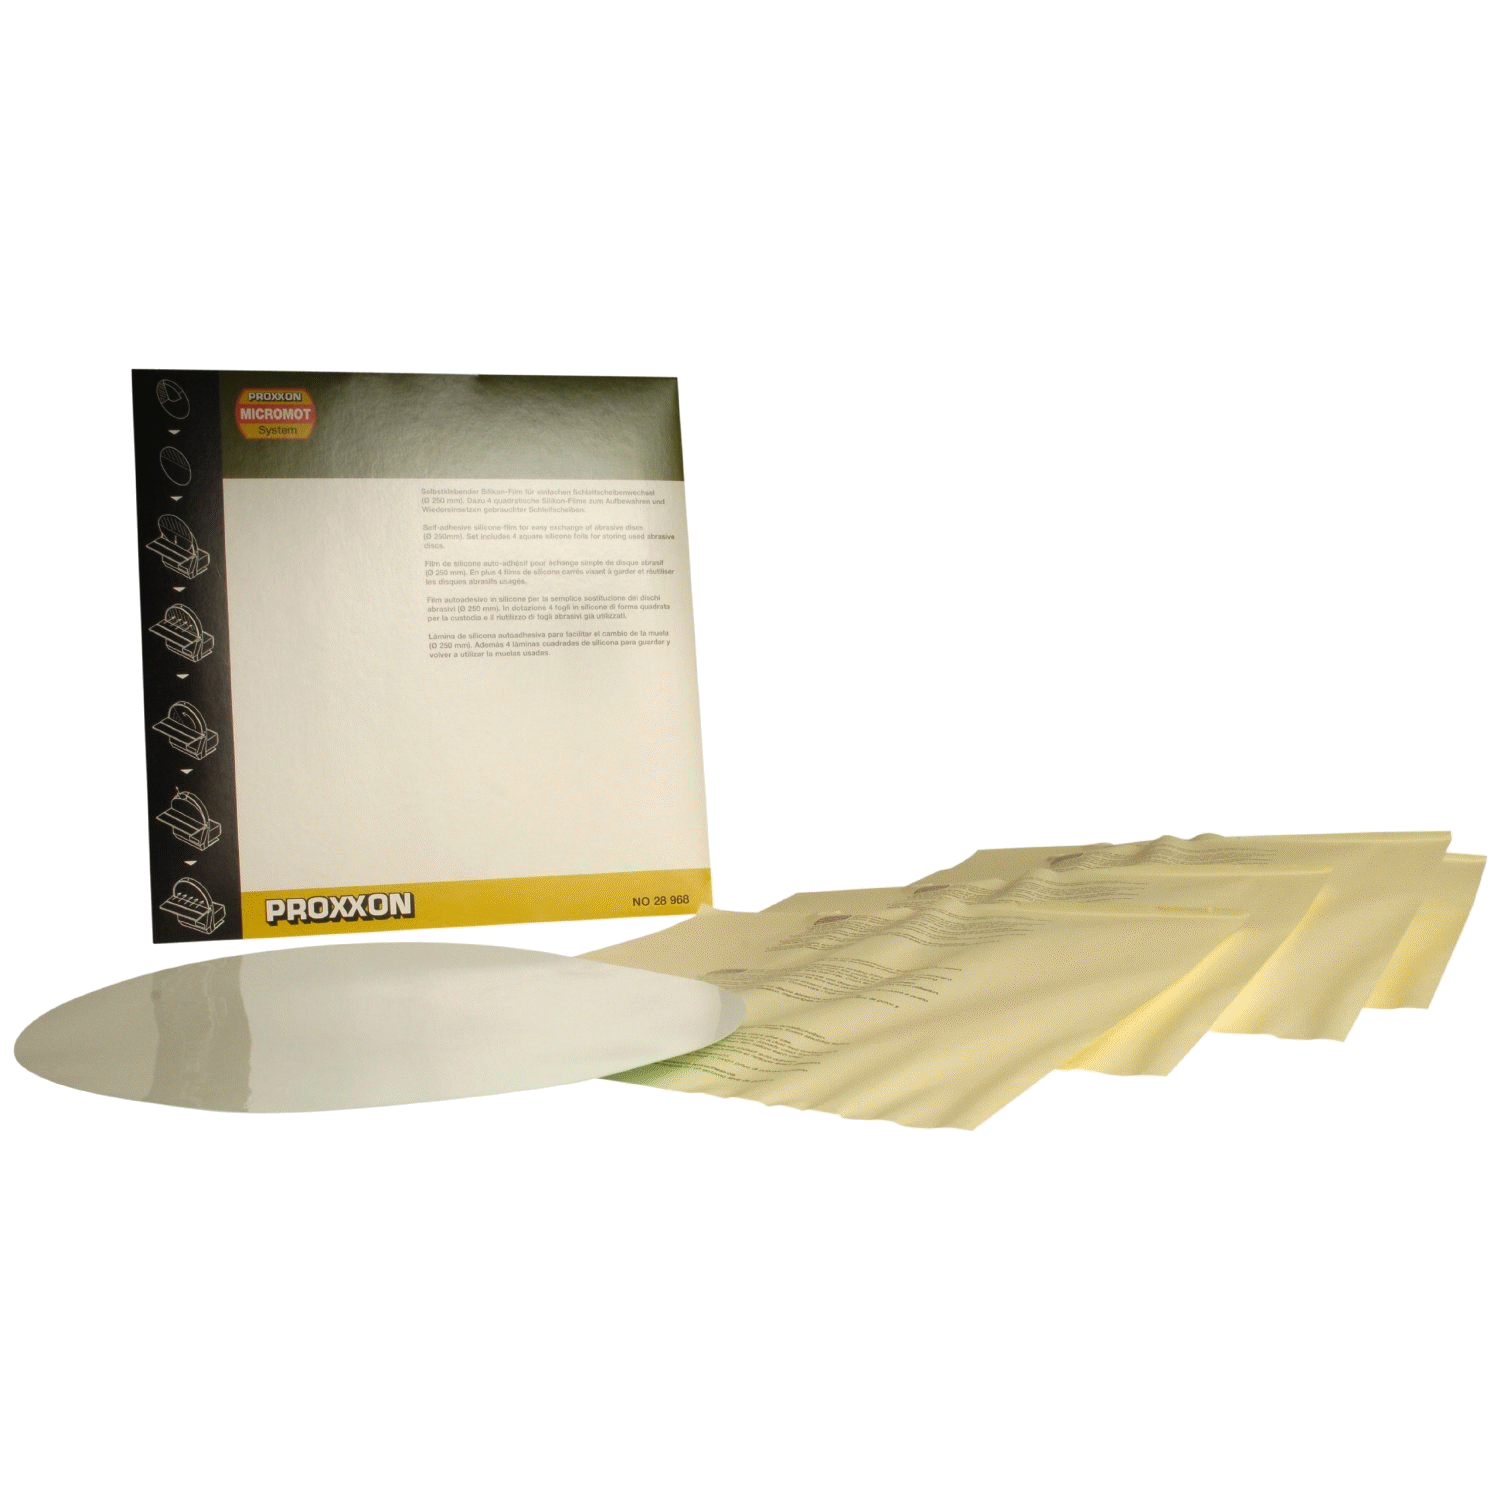 Self-adhesive silicone film for easy sanding disc replacement